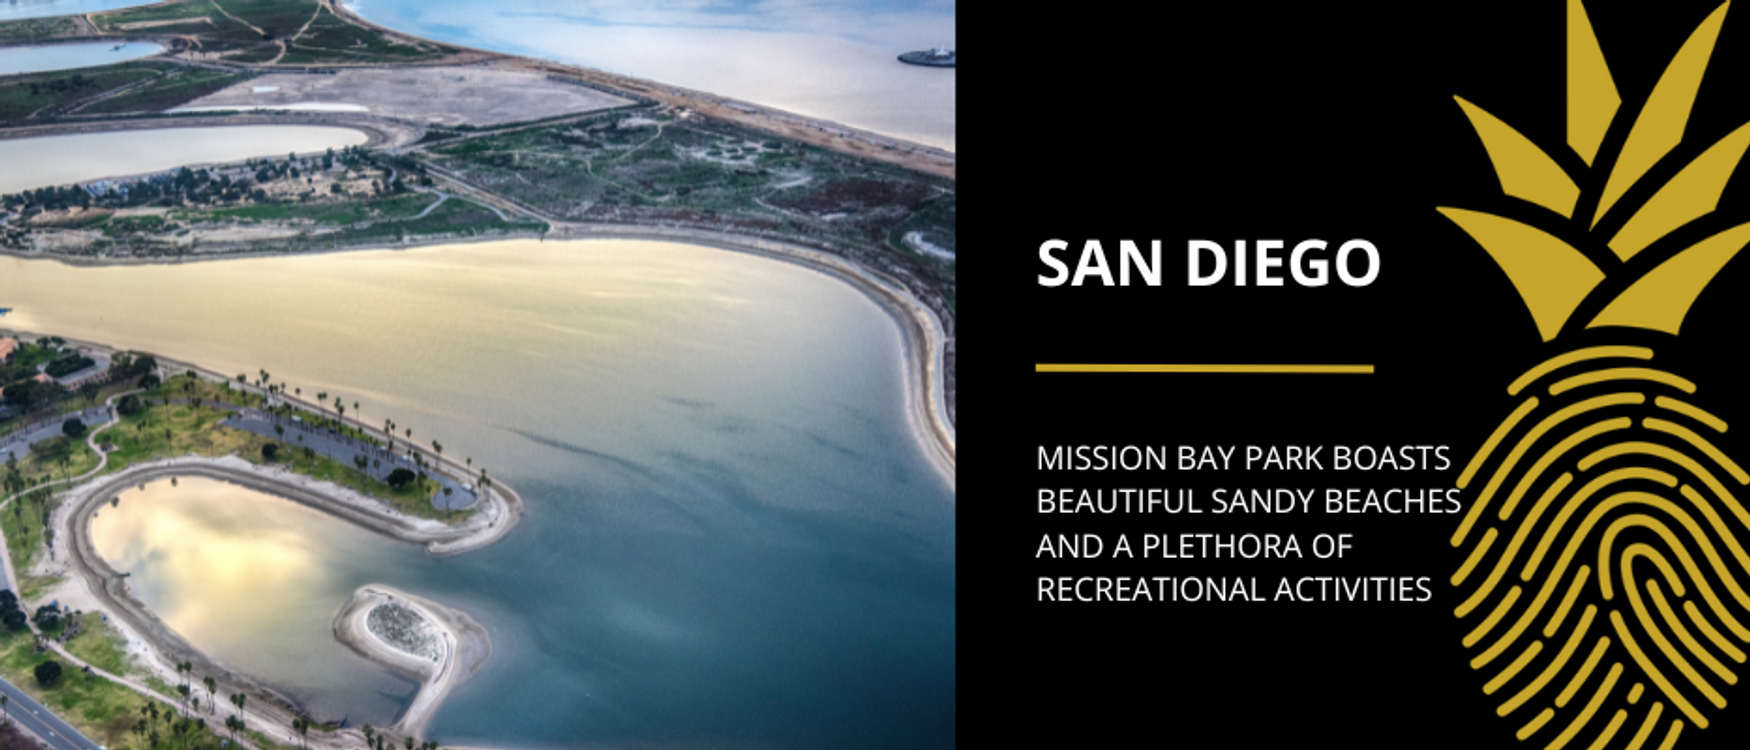 A view of Mission Bay Park in San Diego, California